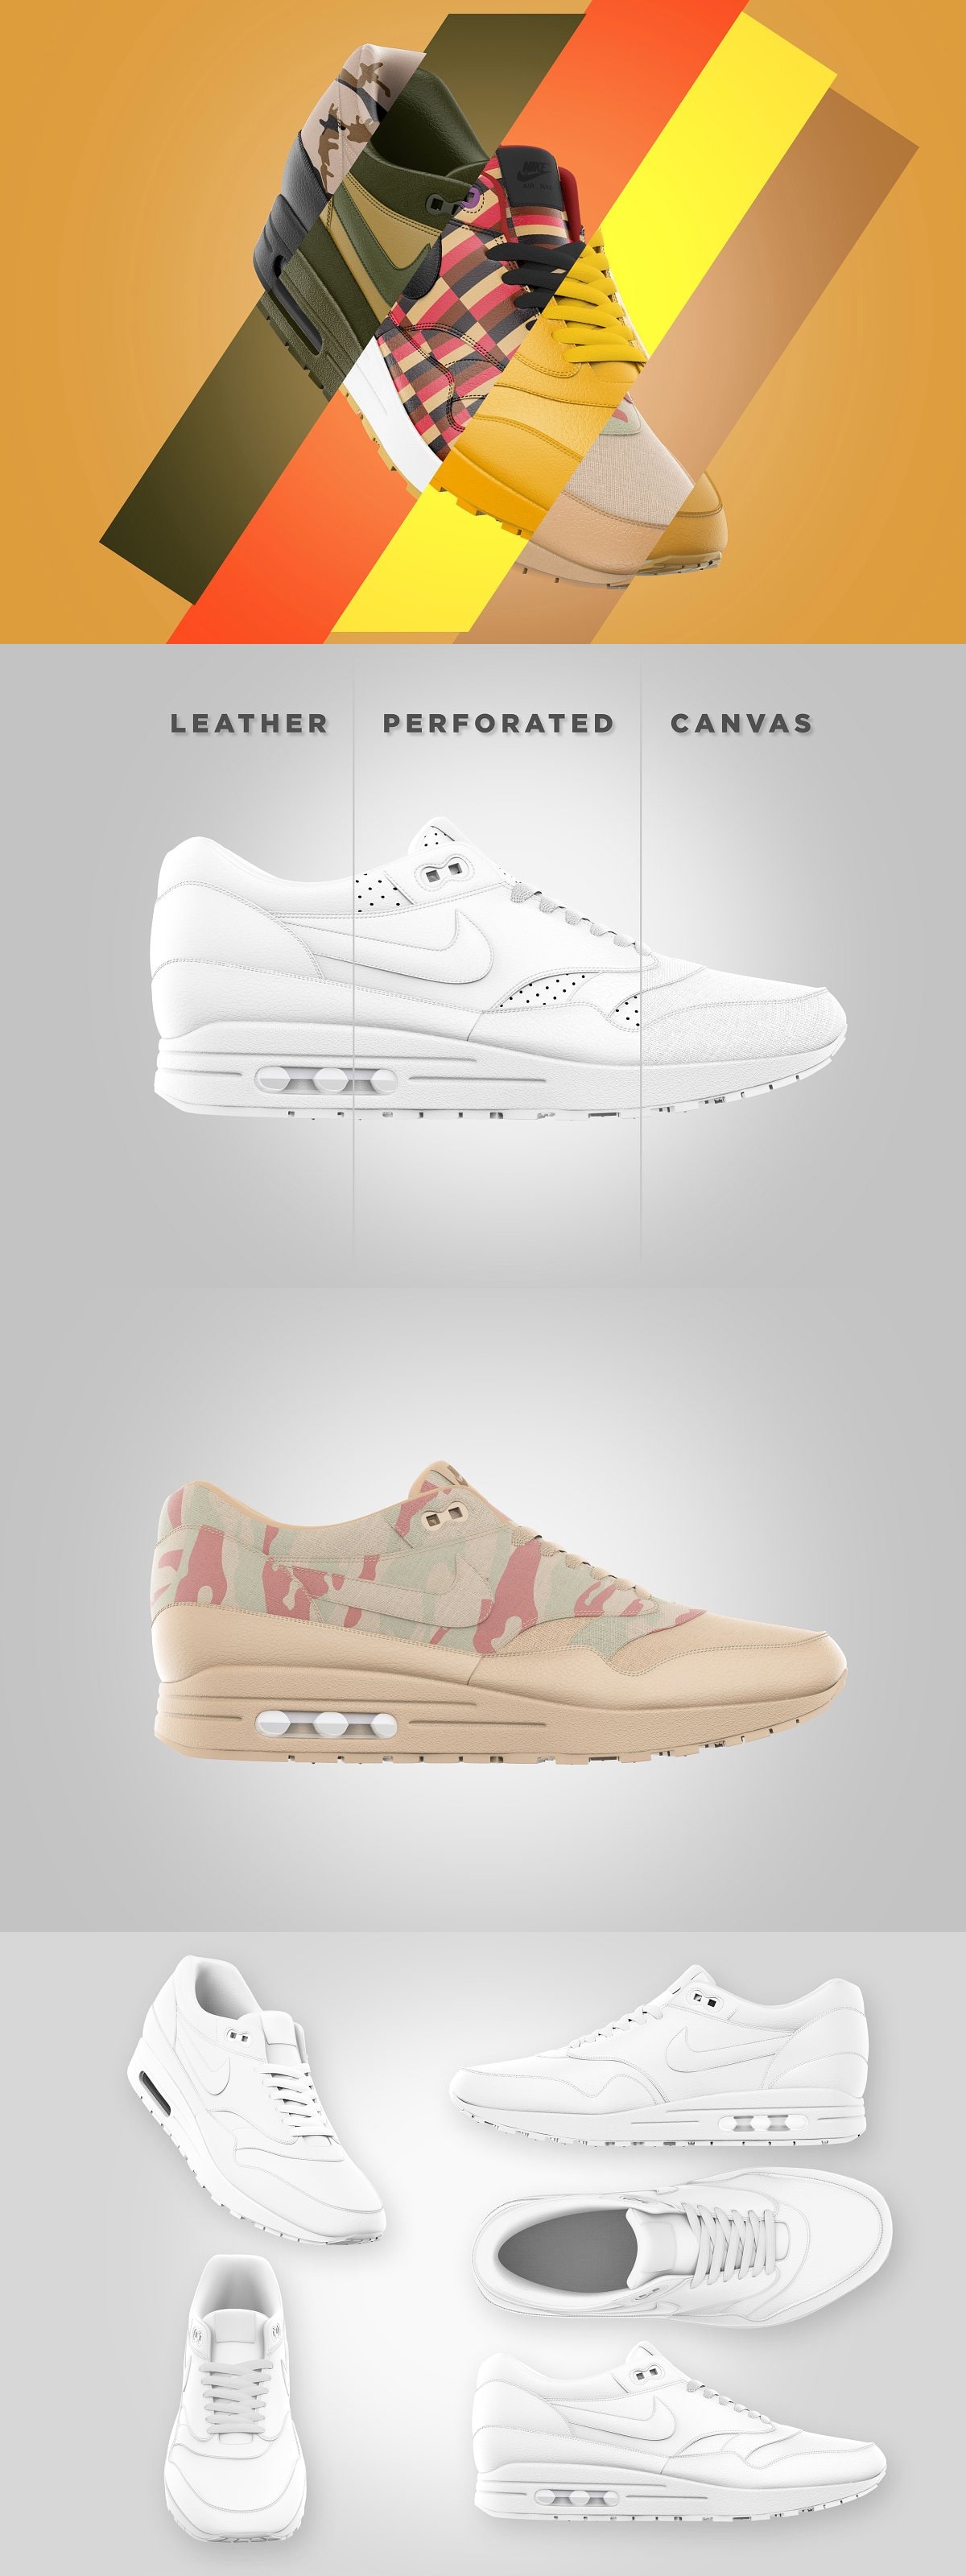 Embajador Oponerse a Inmunizar Nike Air Max 1 - Mockup - Find the Perfect Creative Mockups Freebies to  Showcase your Project to Life